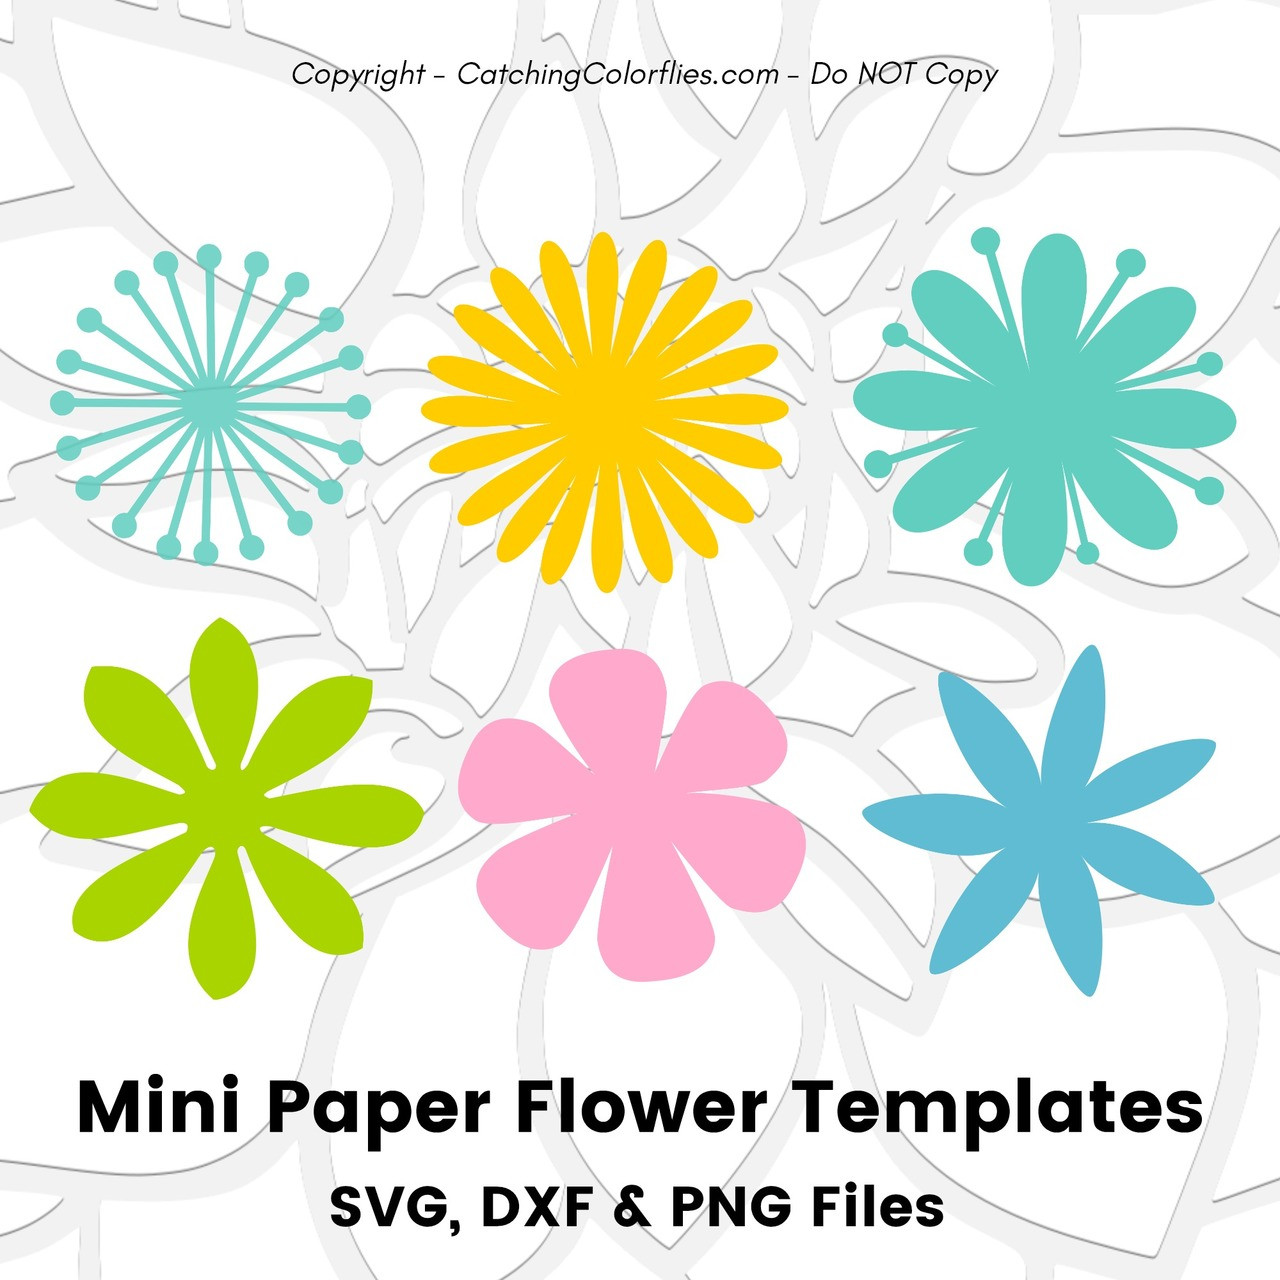 Download Giant Svg Flower Templates Svg Cut Files Catching Colorflies Giant Paper Flowers Paper Flower Templates Svg Large Paper Flowers Cricut Origami Paper Party Supplies